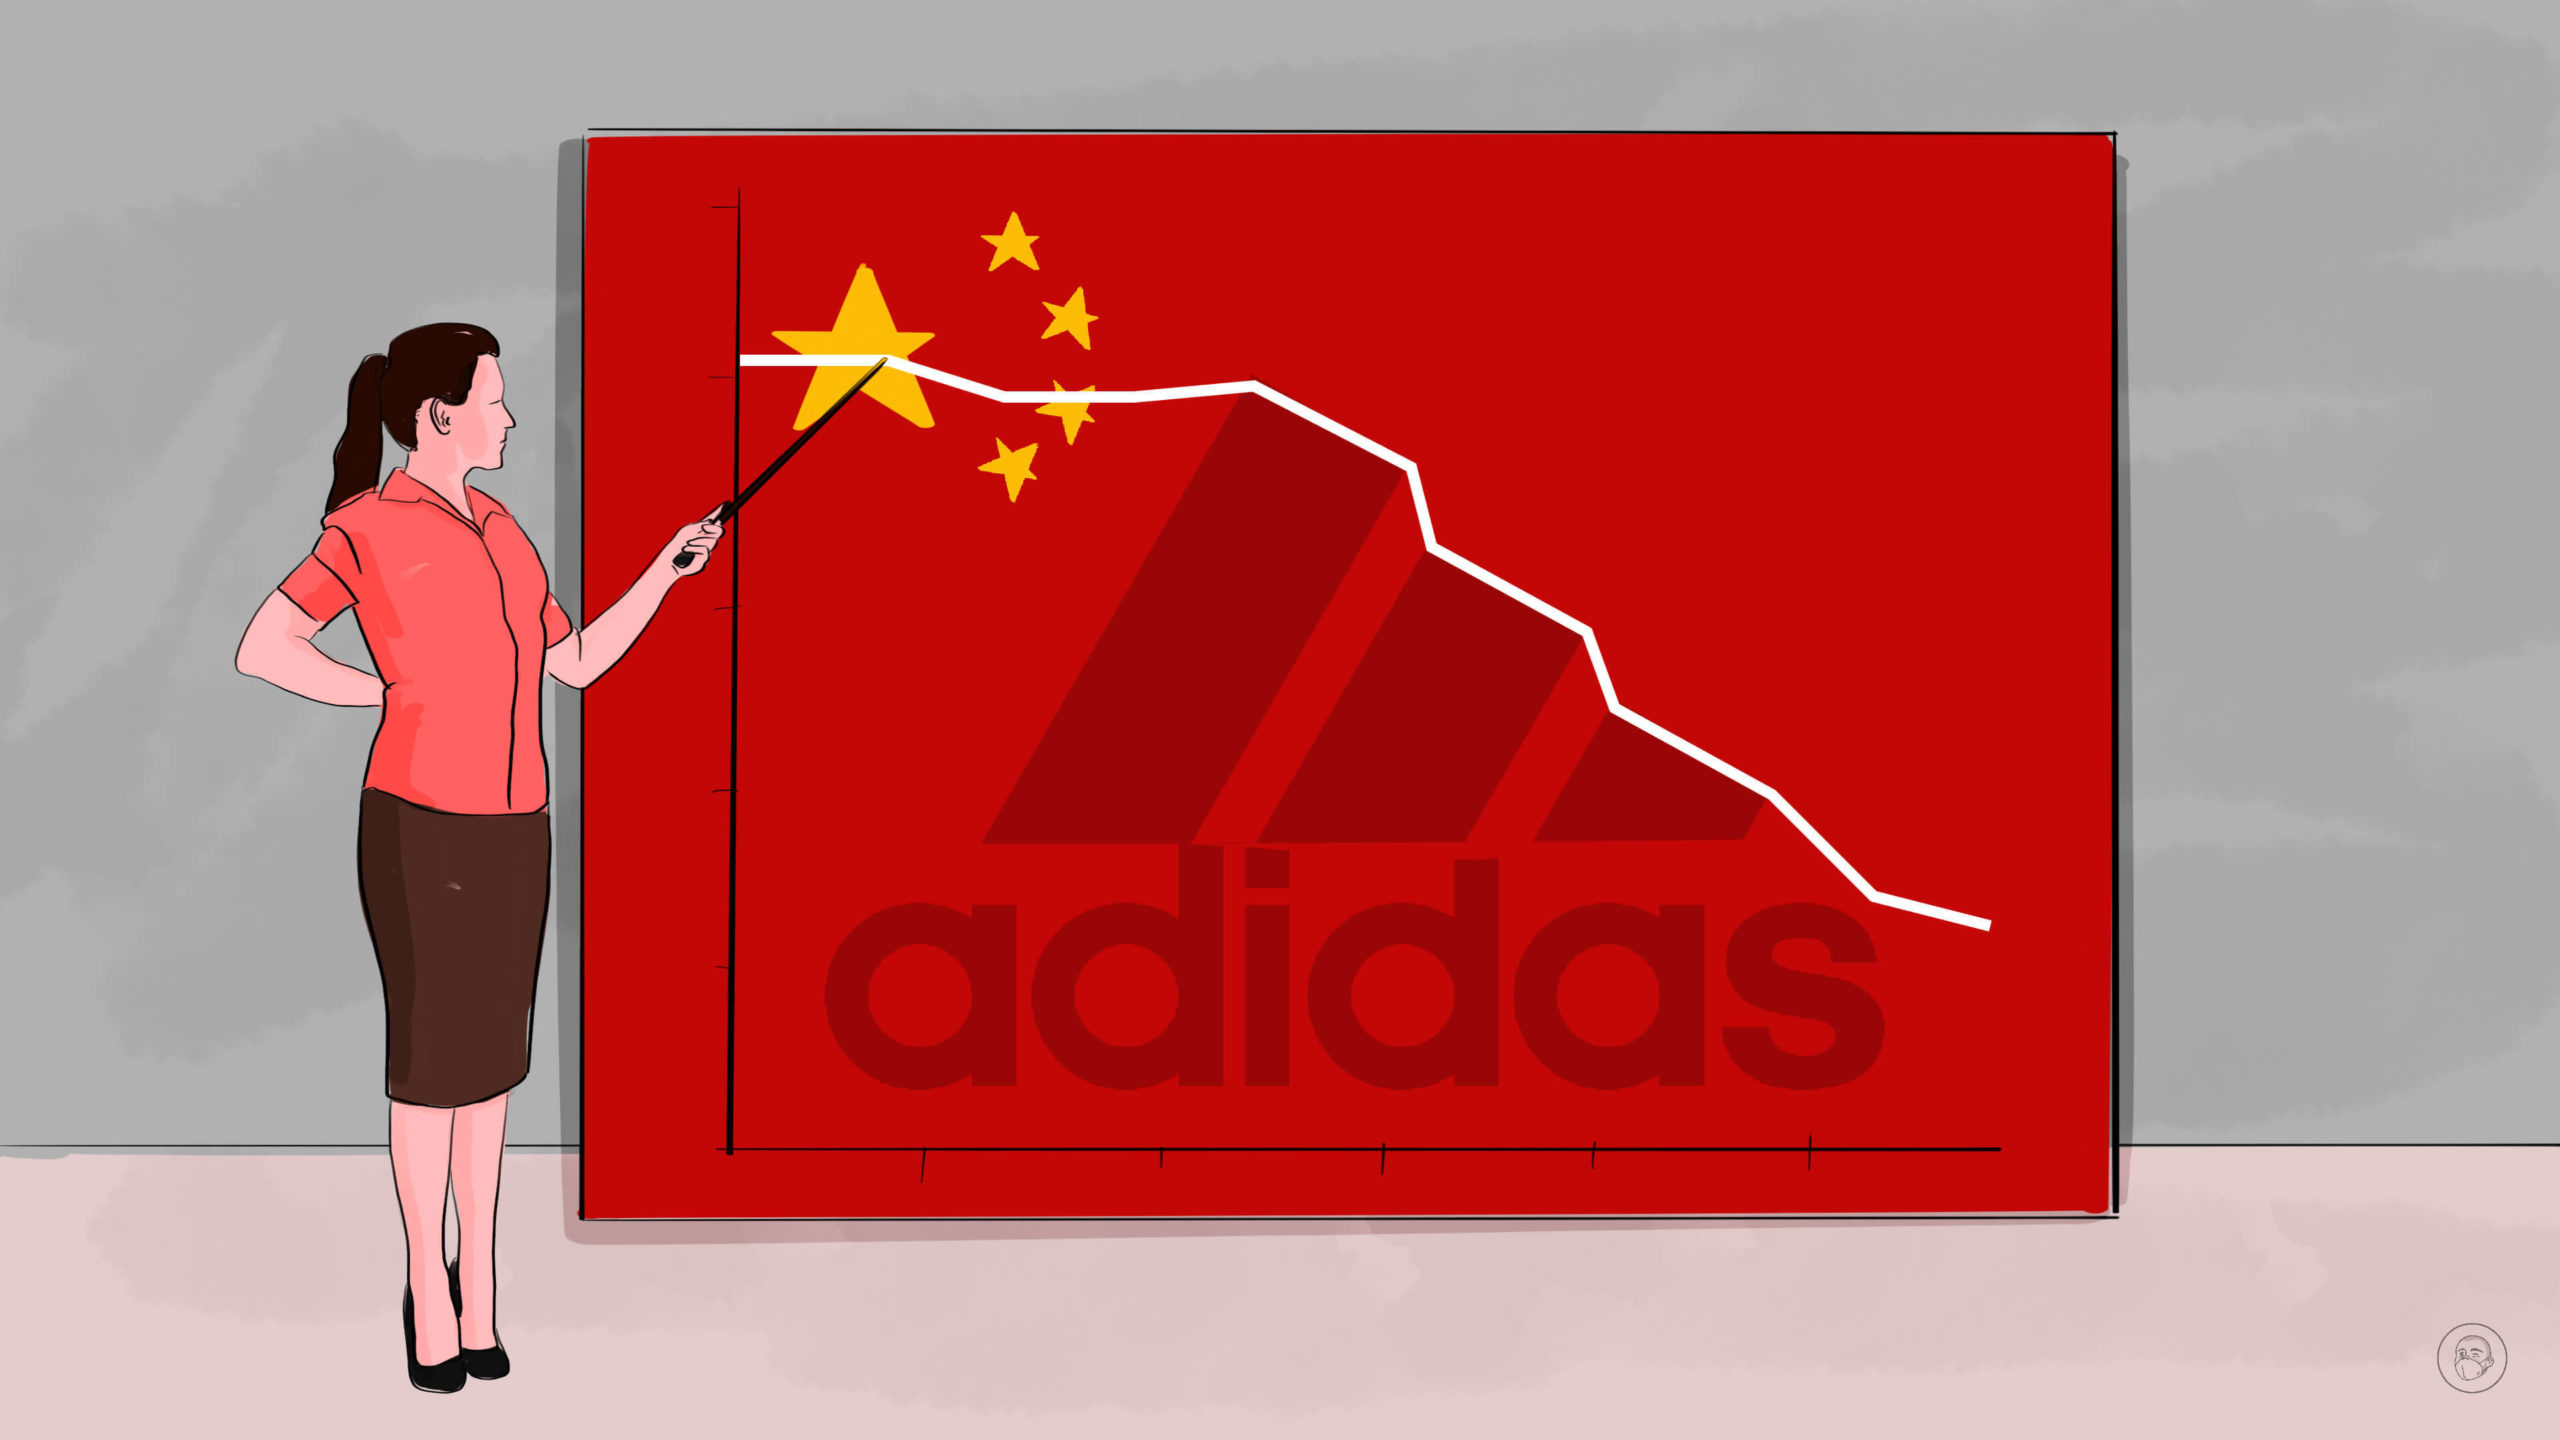 Nike Adidas are blaming COVID for low sales, but the numbers don't add – The China Project